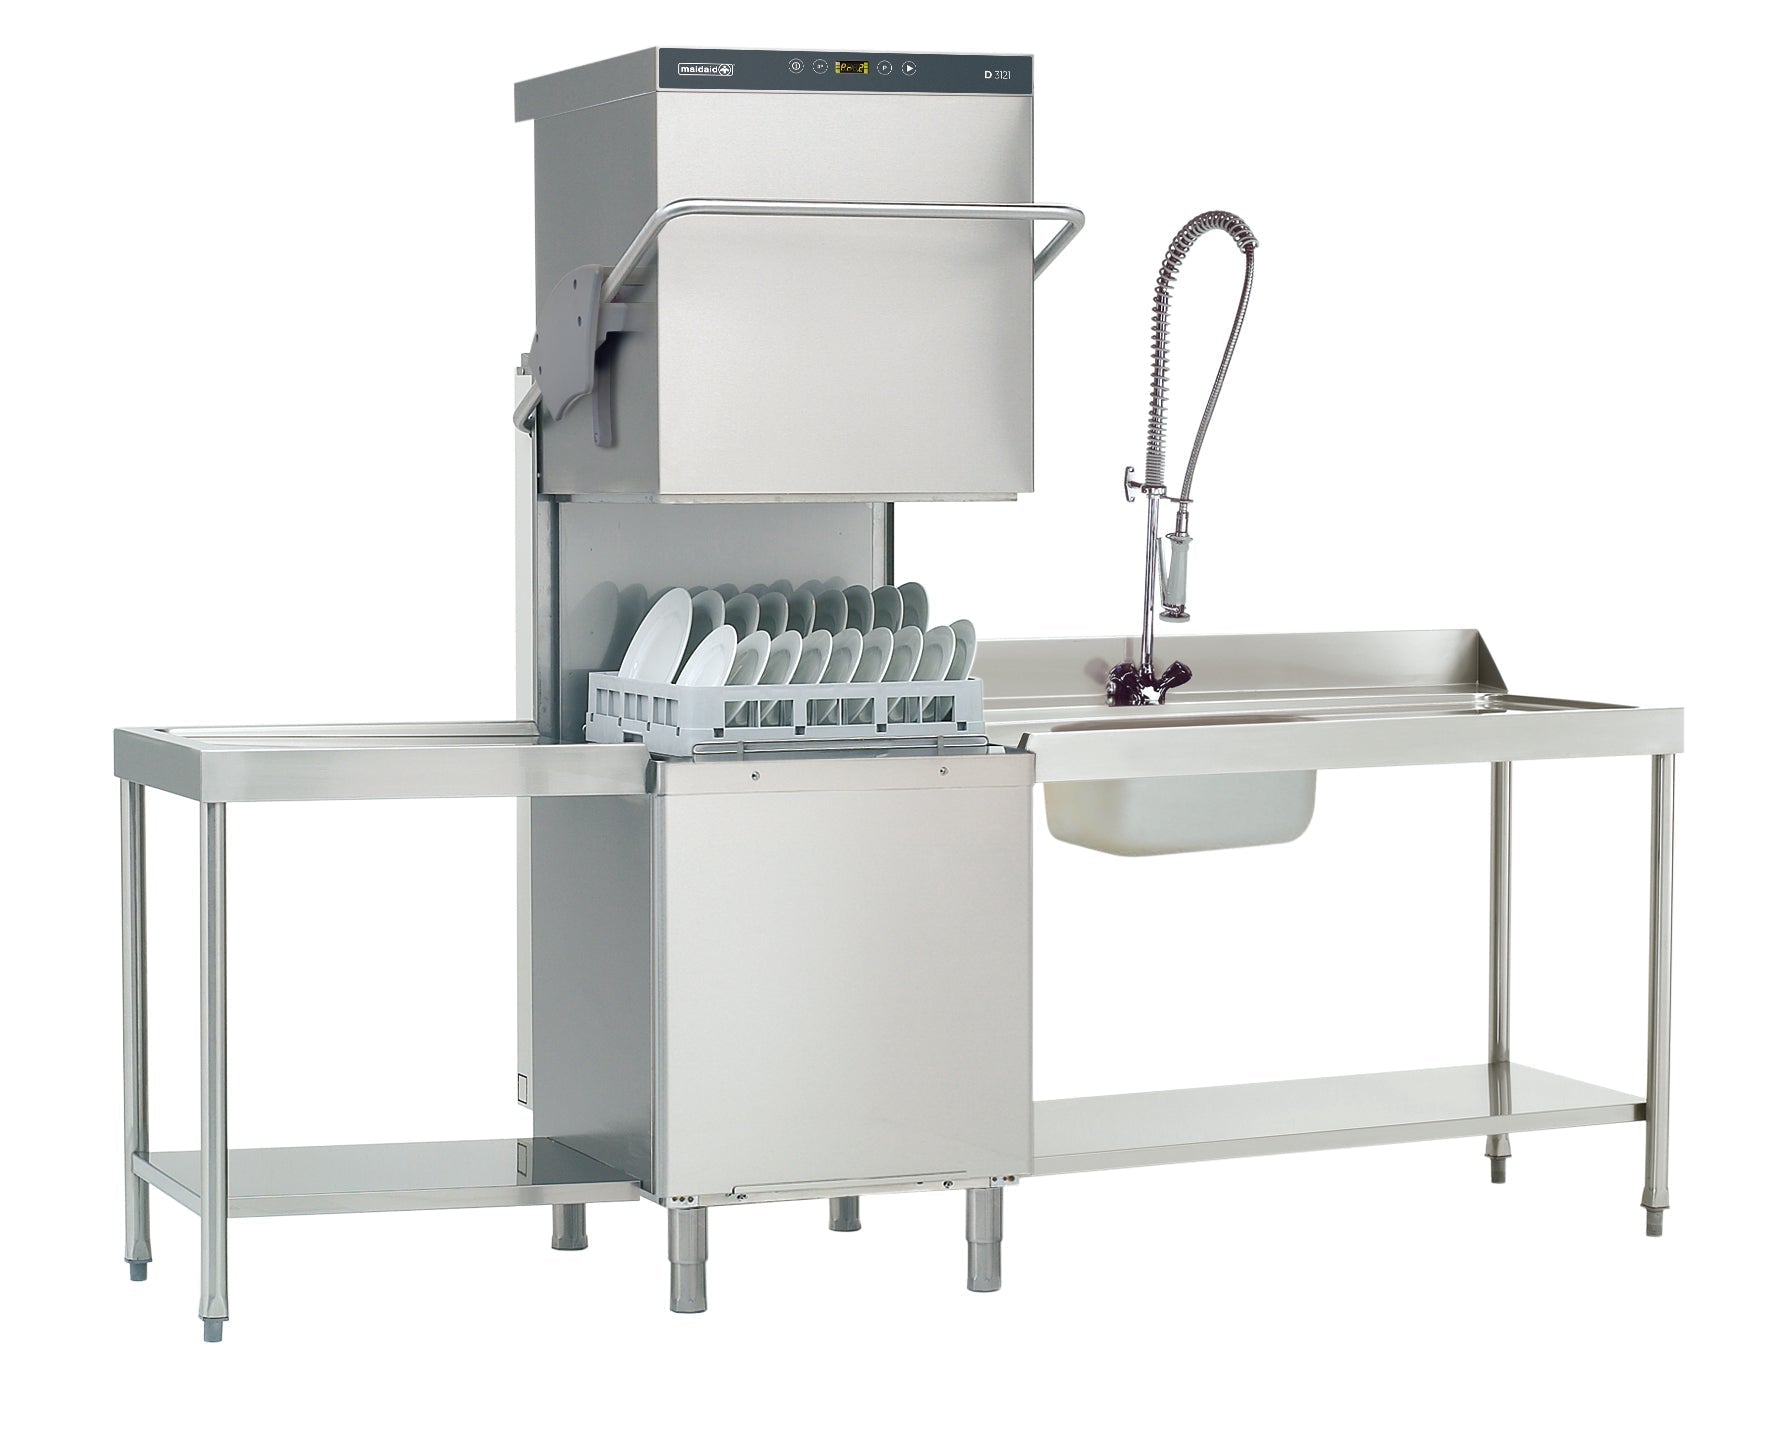 Maidaid Halcyon D3121 Passthrough Dishwasher JD Catering Equipment Solutions Ltd